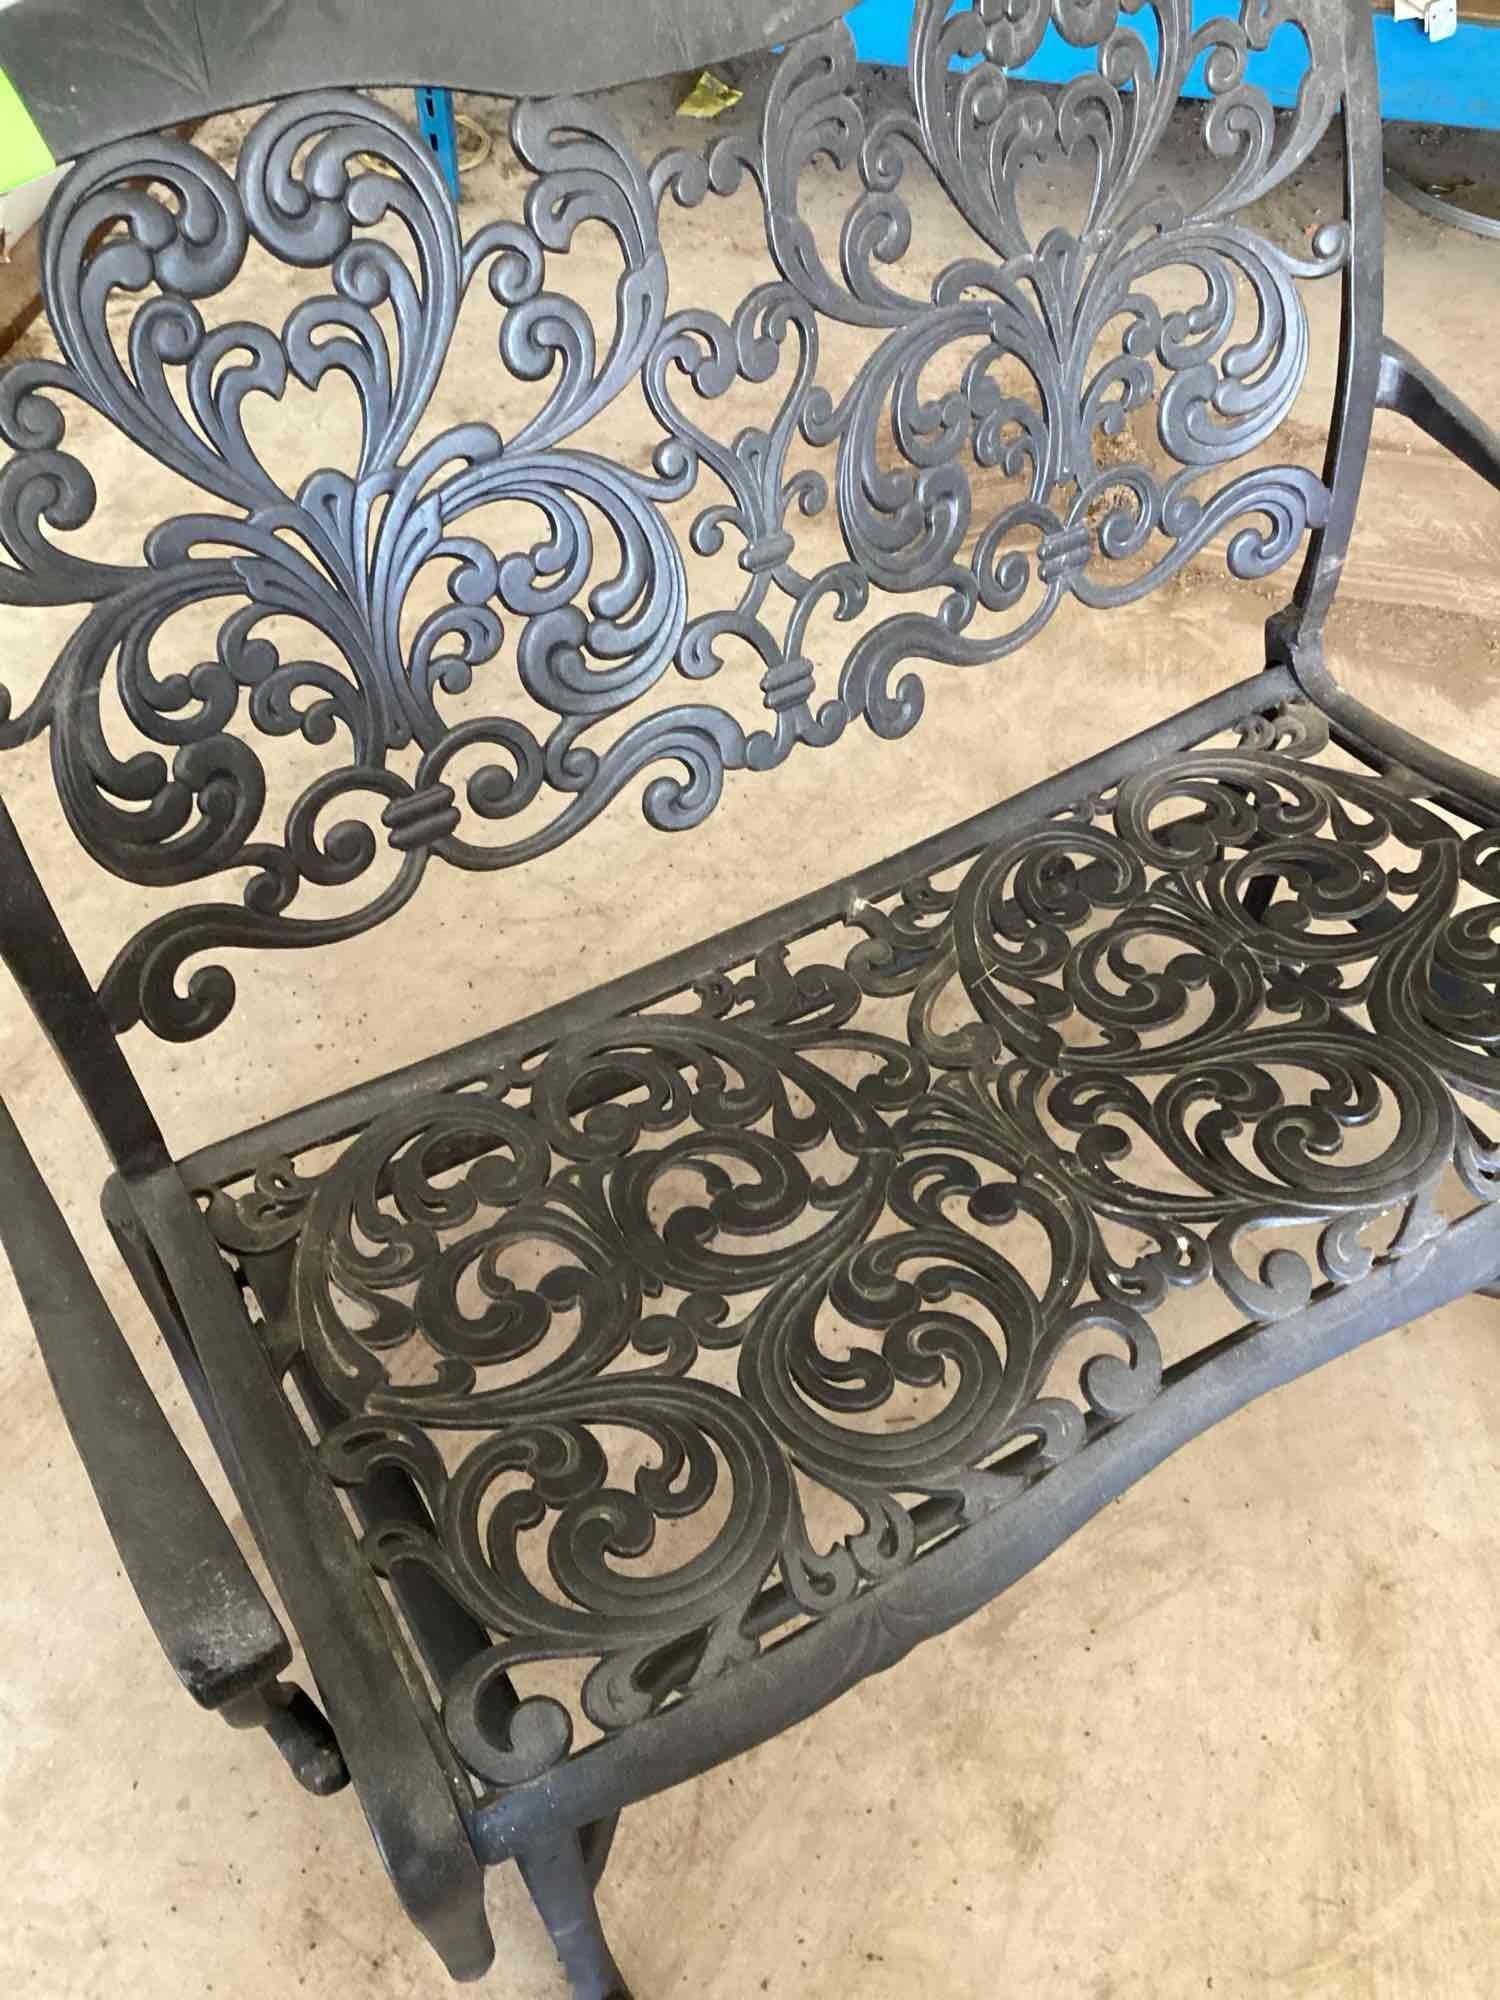 Wrought iron glider bench. Two cushions are included but it is...comfortable with or without the